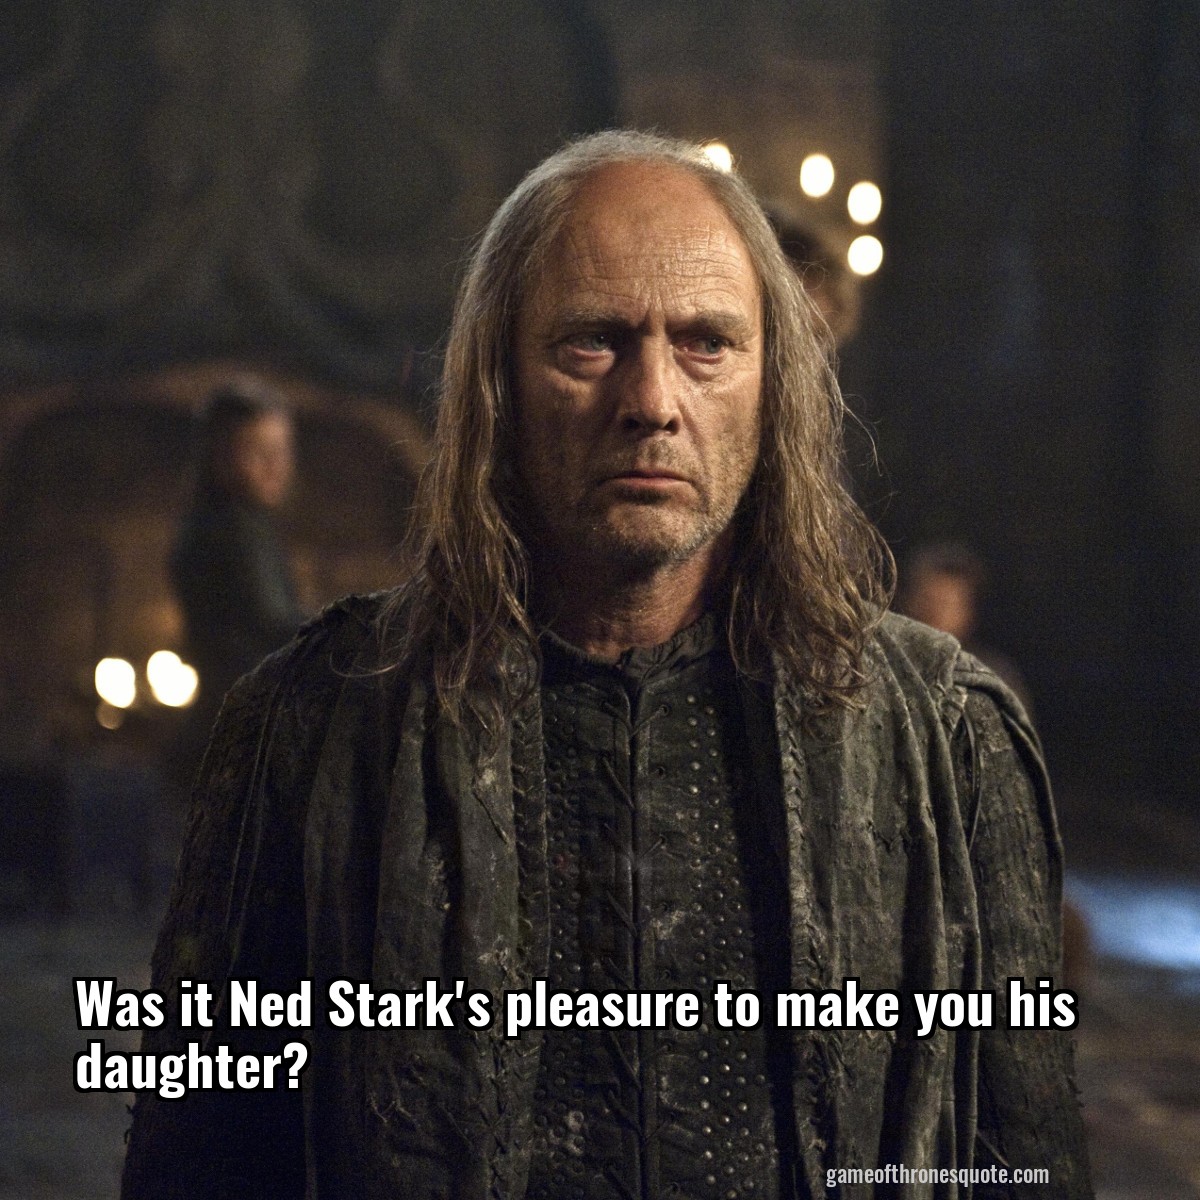 Was it Ned Stark's pleasure to make you his daughter?